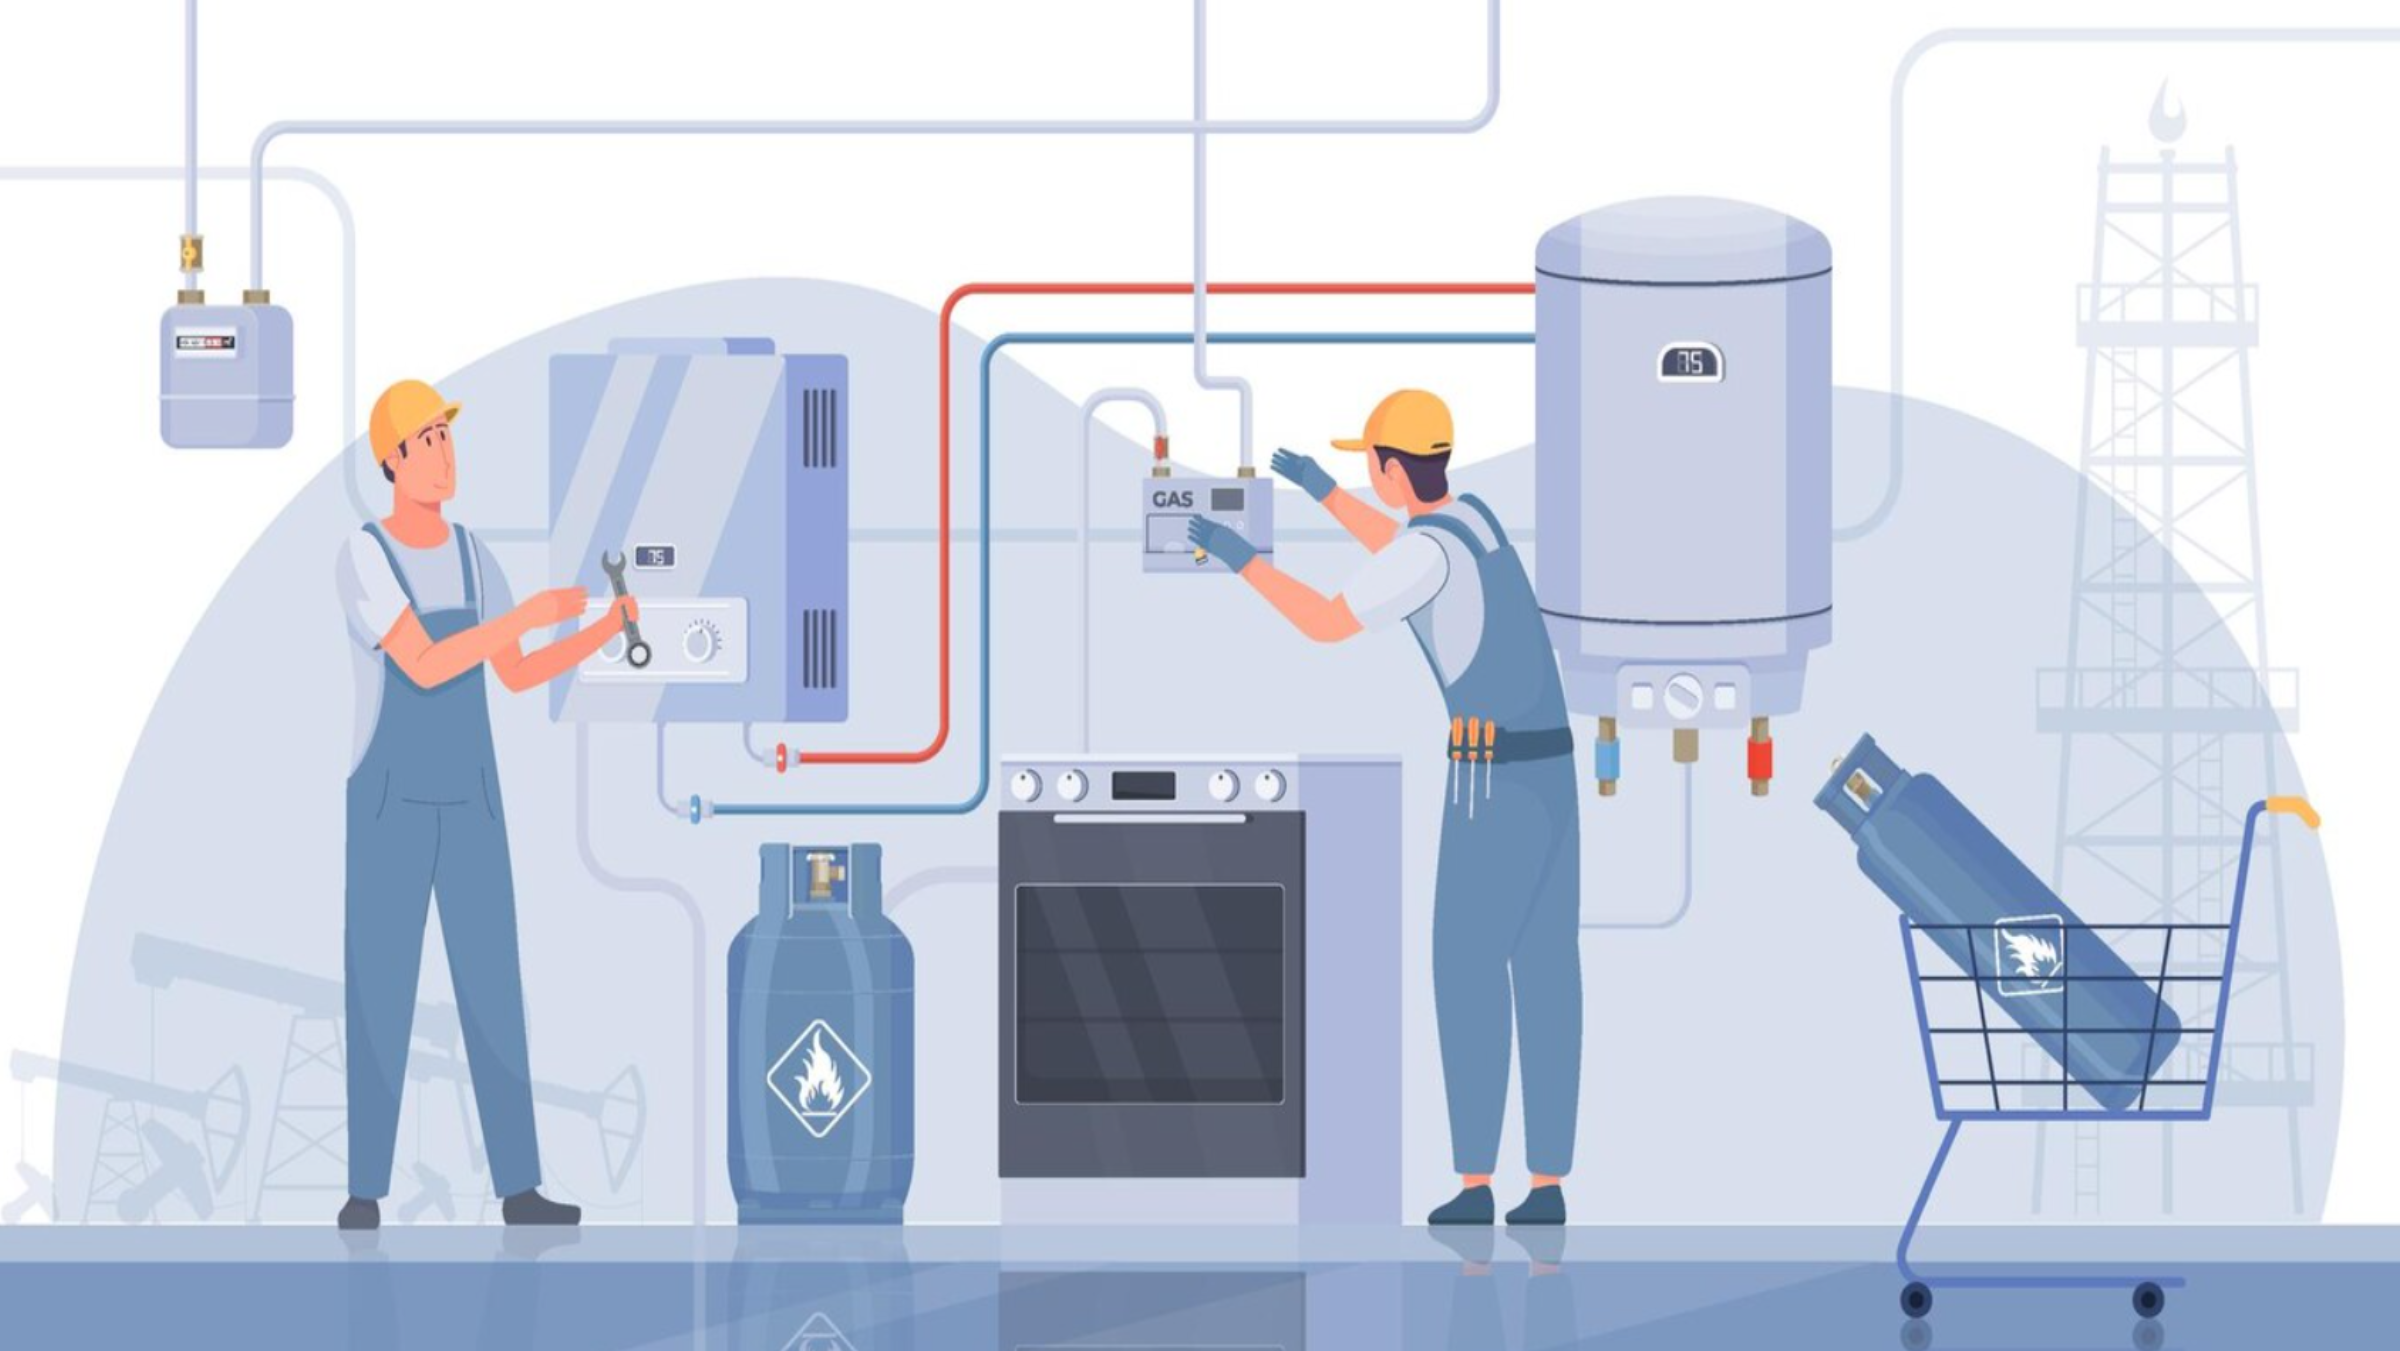 Animated image of two technicians working on a furnace